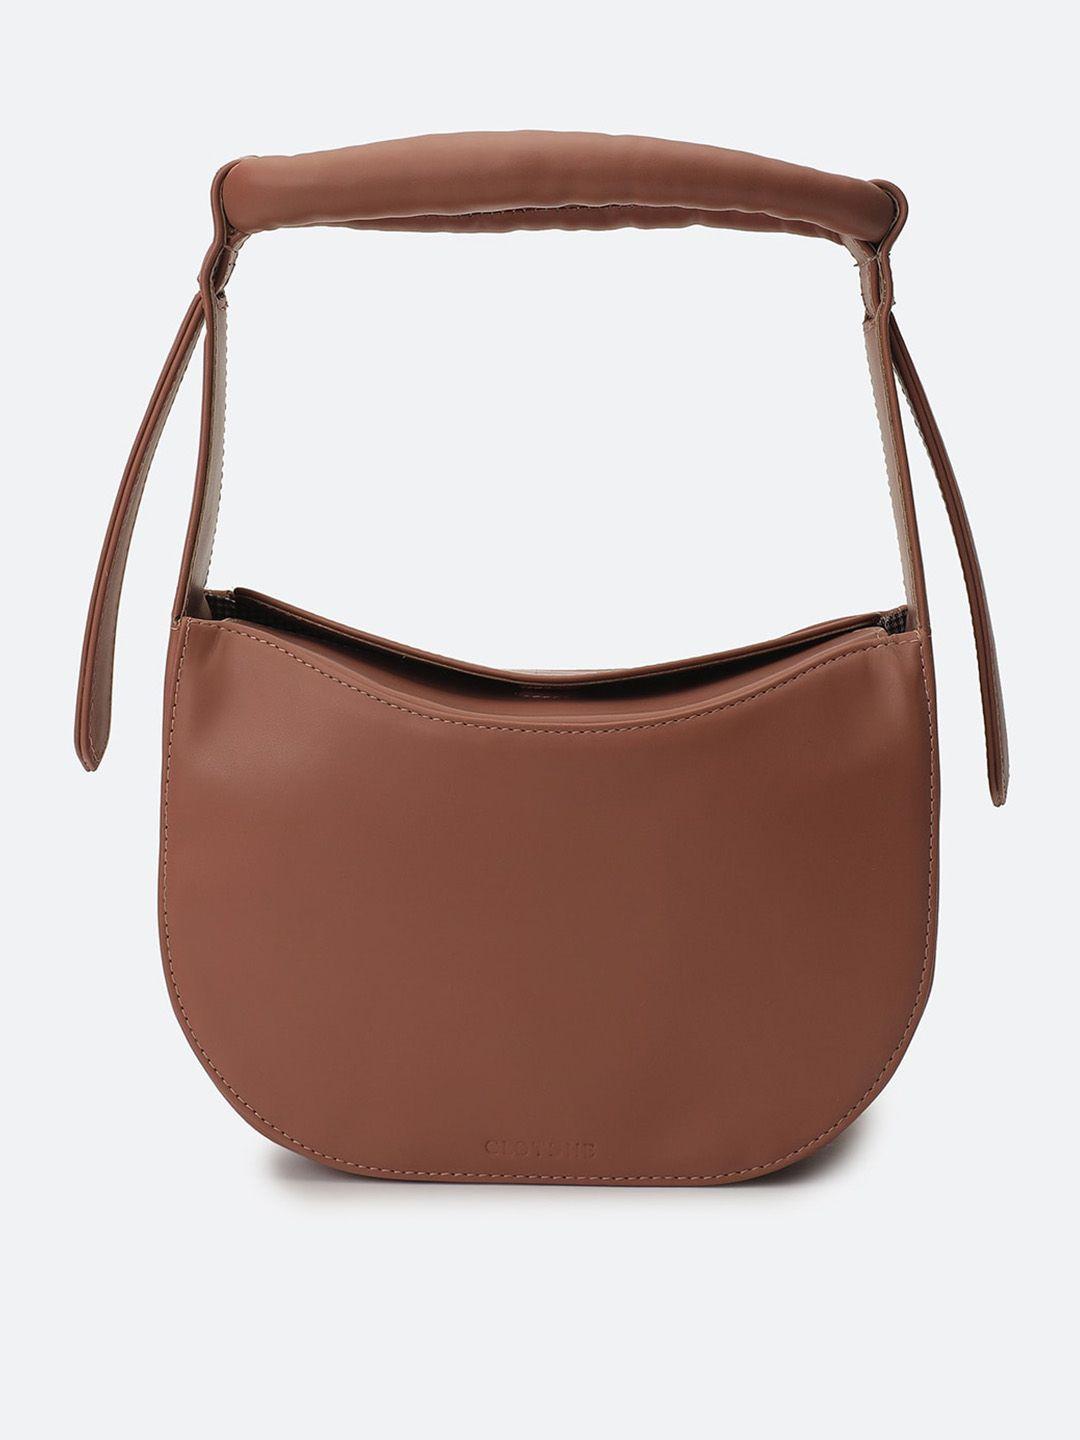 clotche leather structured hobo bag